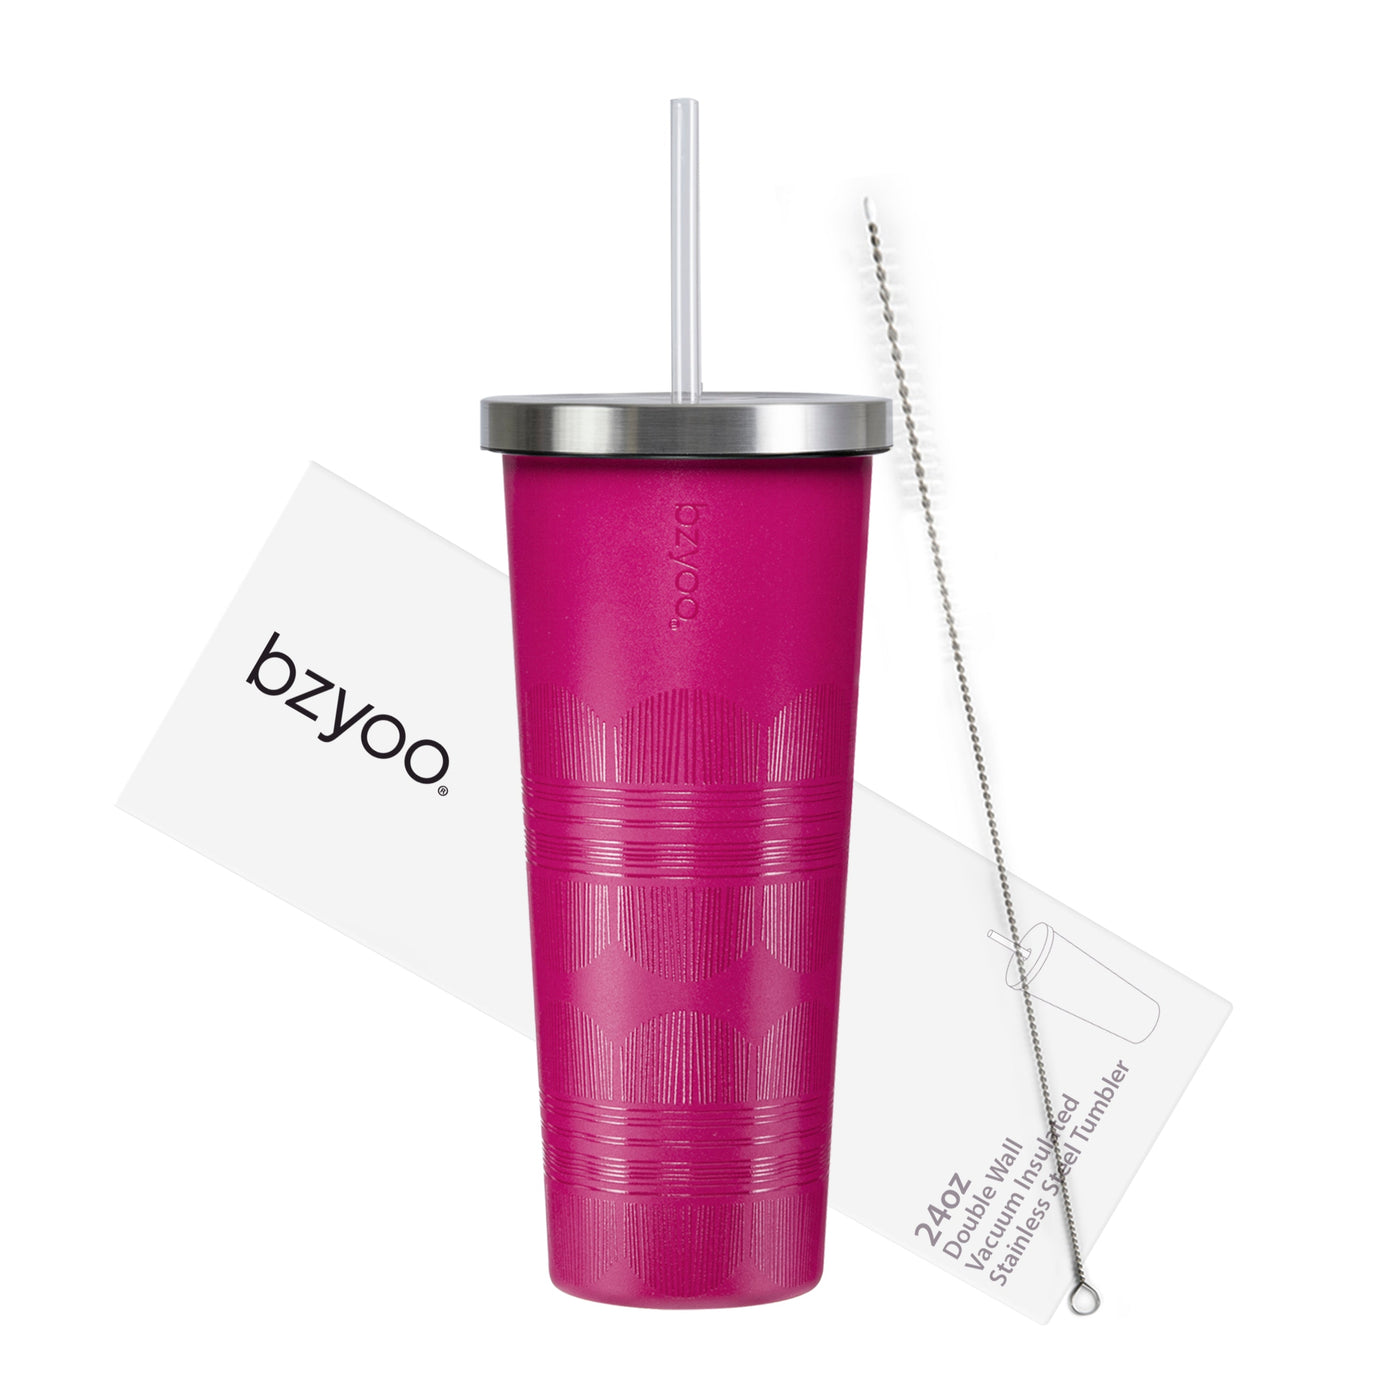 24oz SUP Double Wall Vacuum Insulated Stainless Steel Tumbler w/ Straw Lid - Scribe Purple